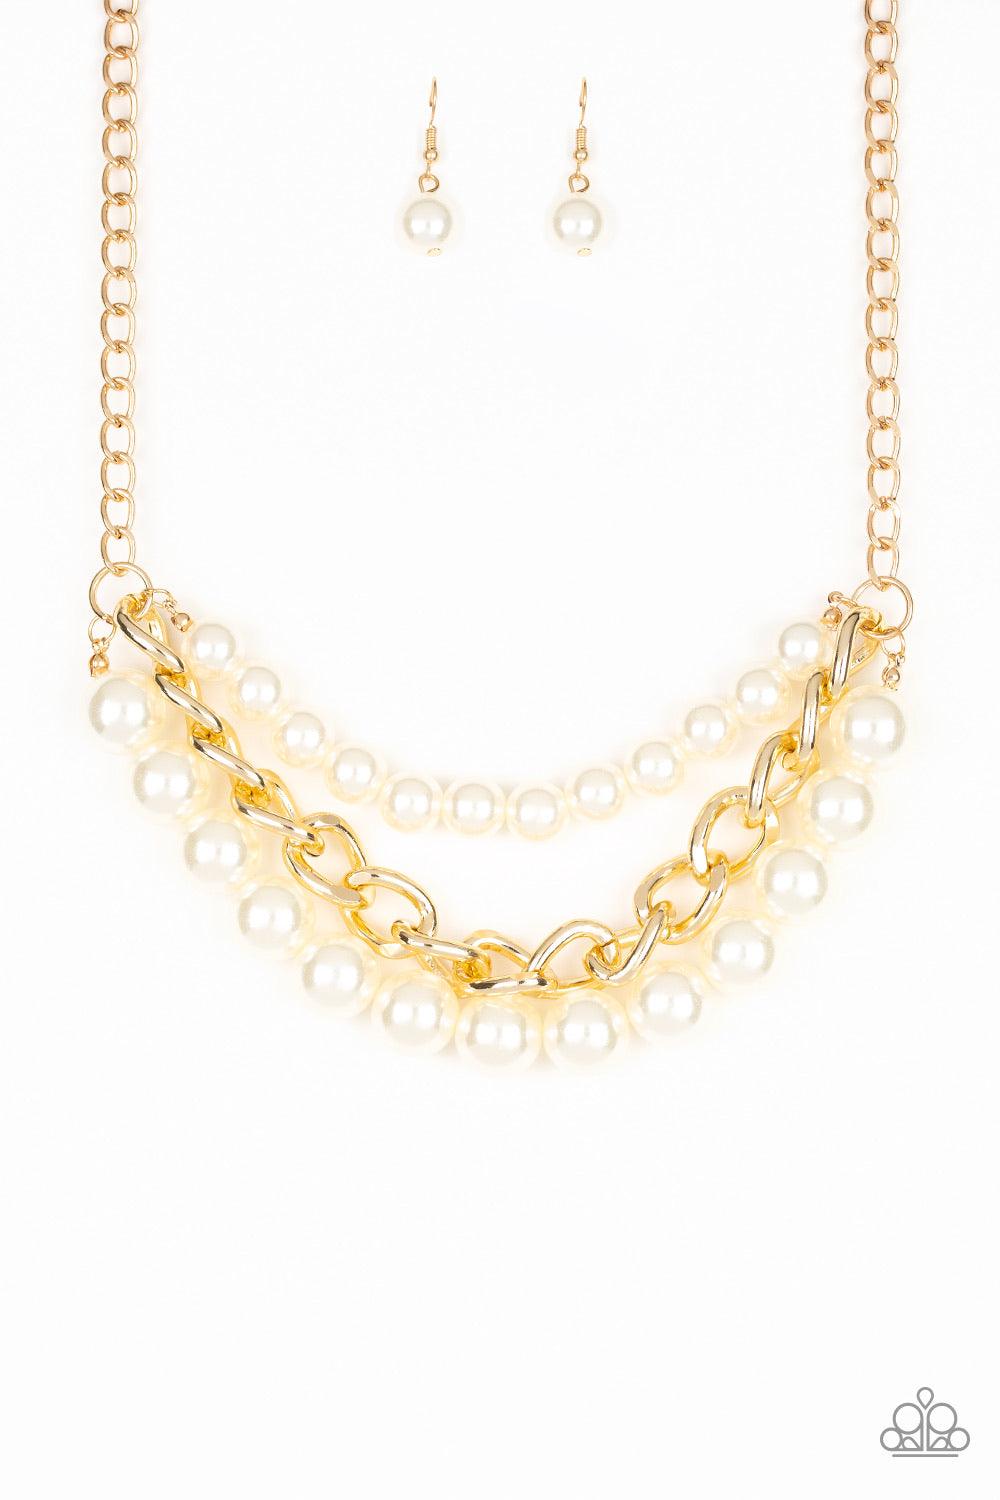 Paparazzi Accessories Empire State Empress - Gold Two strands of dramatic white pearls flank one strand of oversized gold chain, creating statement-making layers below the collar. Features an adjustable clasp closure. Sold as one individual necklace. Incl